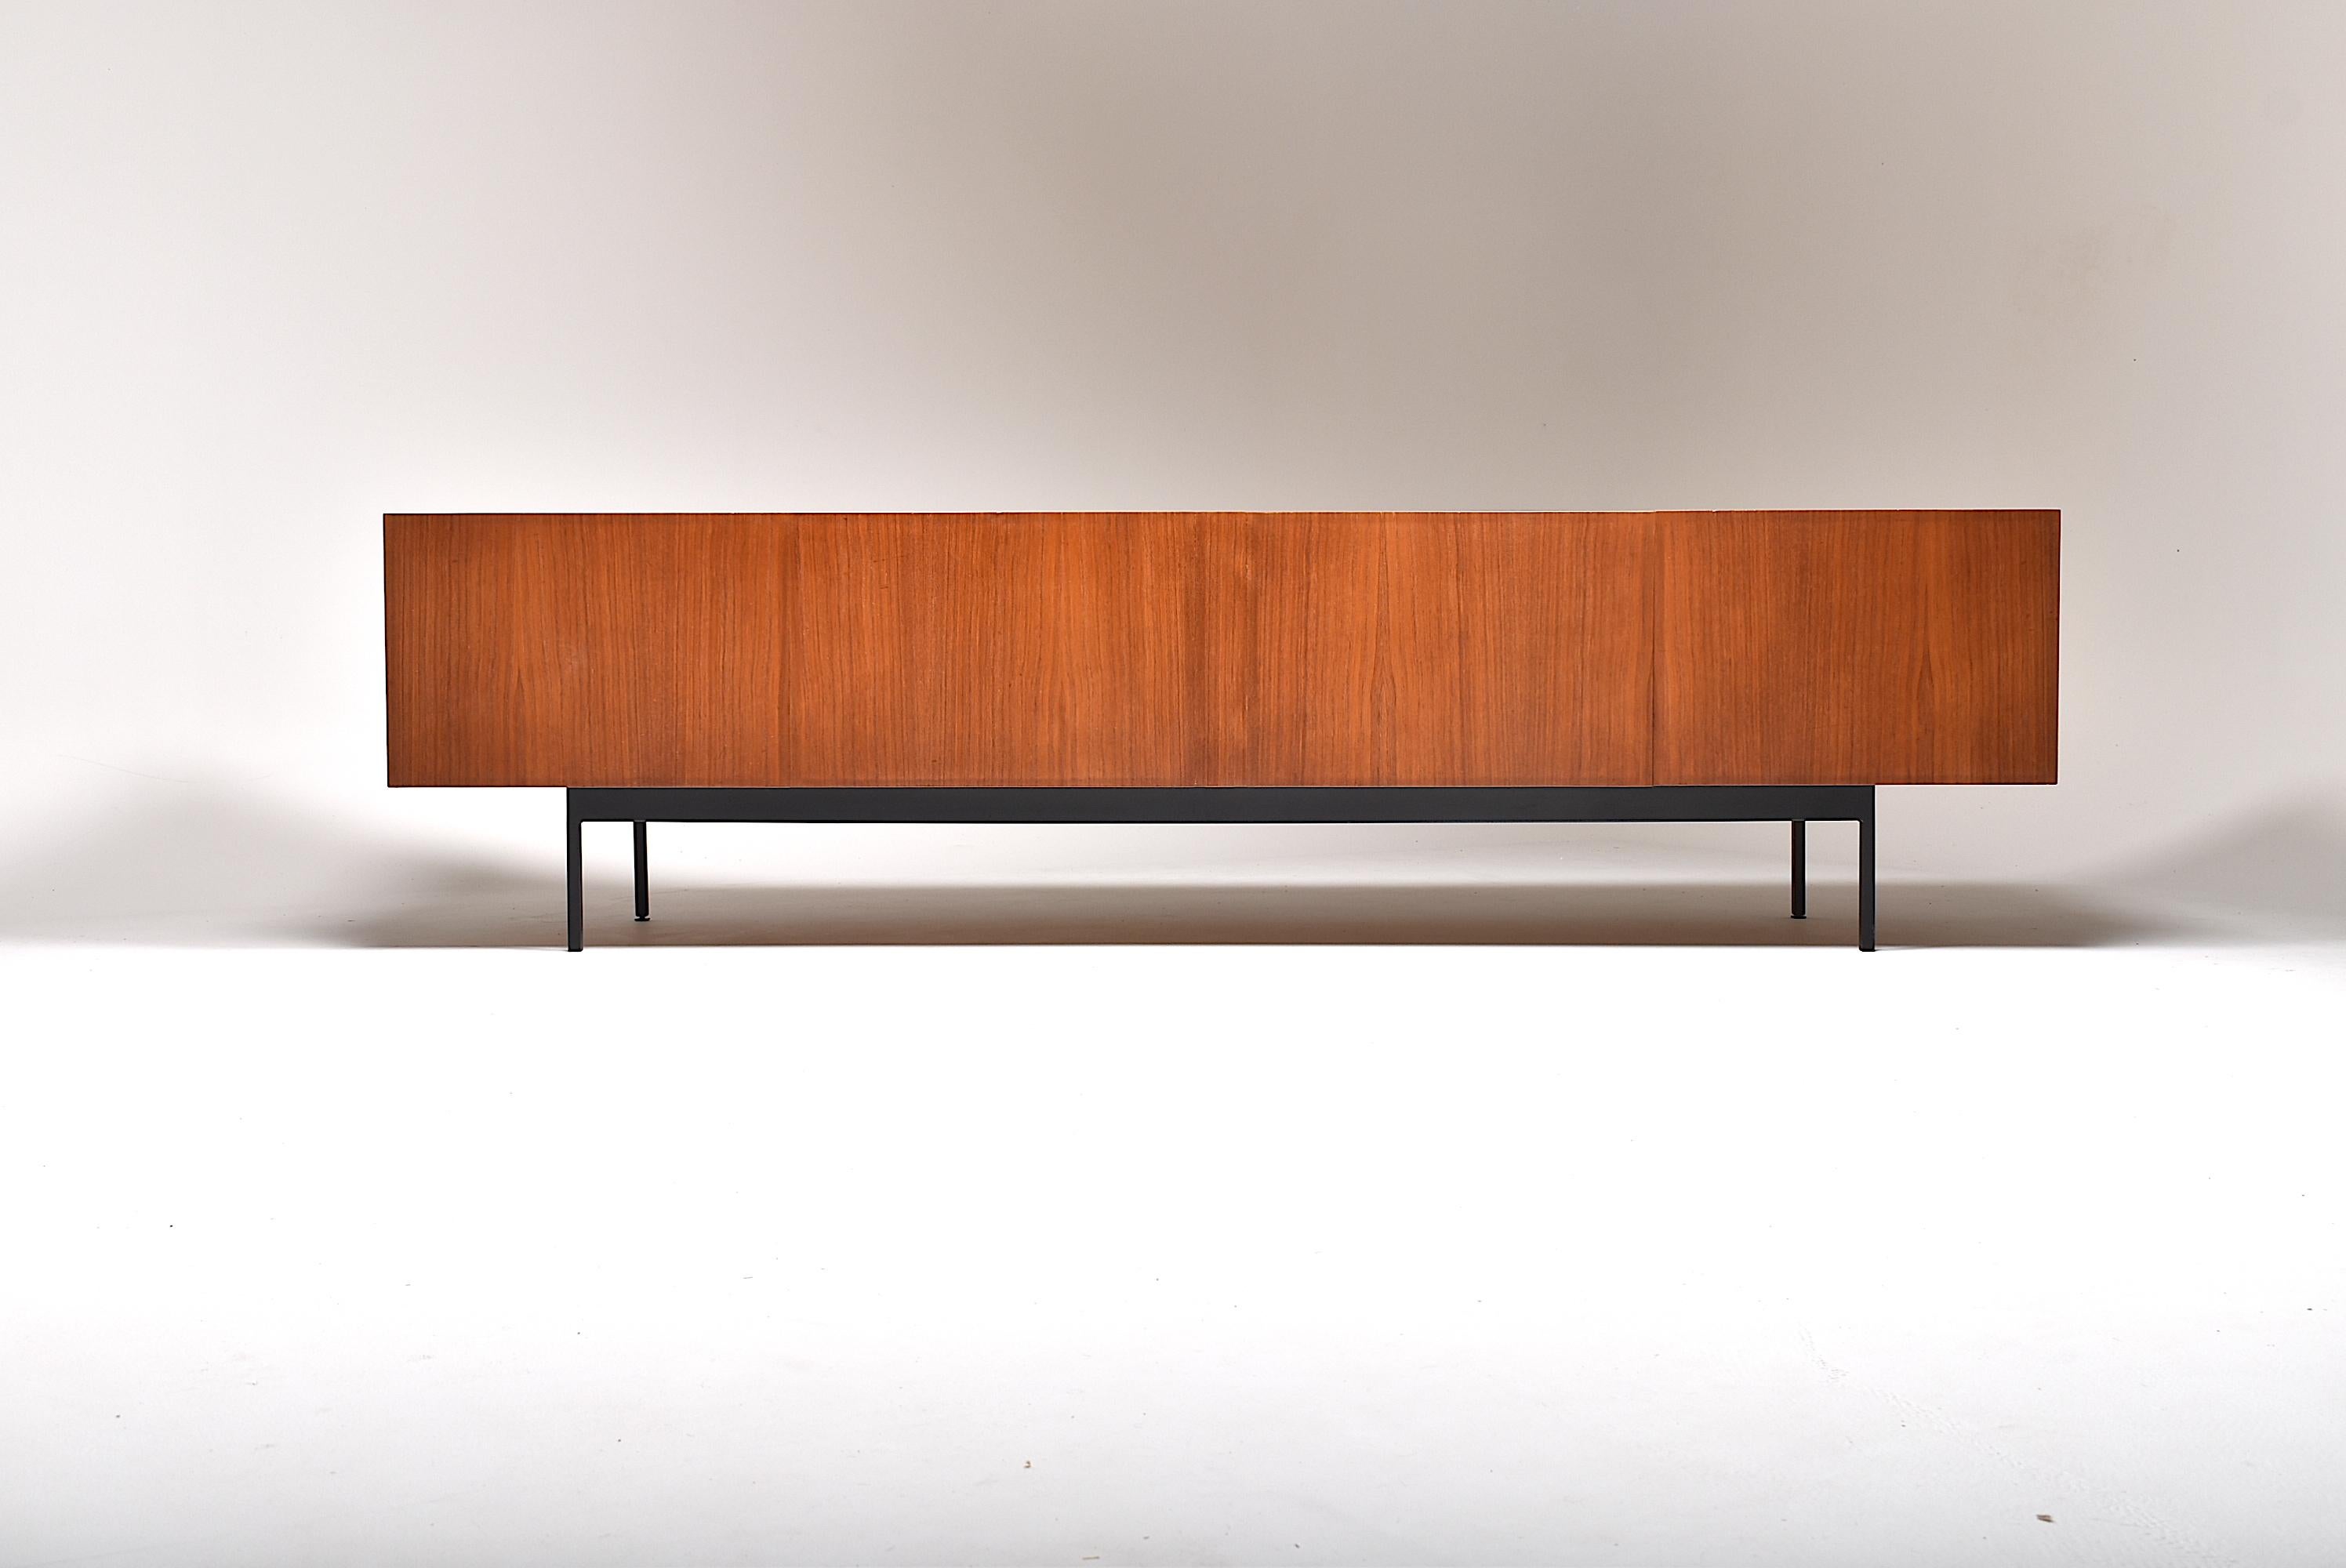 Rare b40 teak sideboard by Dieter Waeckerlin for Idealheim Basel.
This is the longest version with 262cm, made in Switzerland, Basel, in the 50s.
Very beautiful proportions, based on Le Corbusier's modulor.
High quality manufacturing. 
It